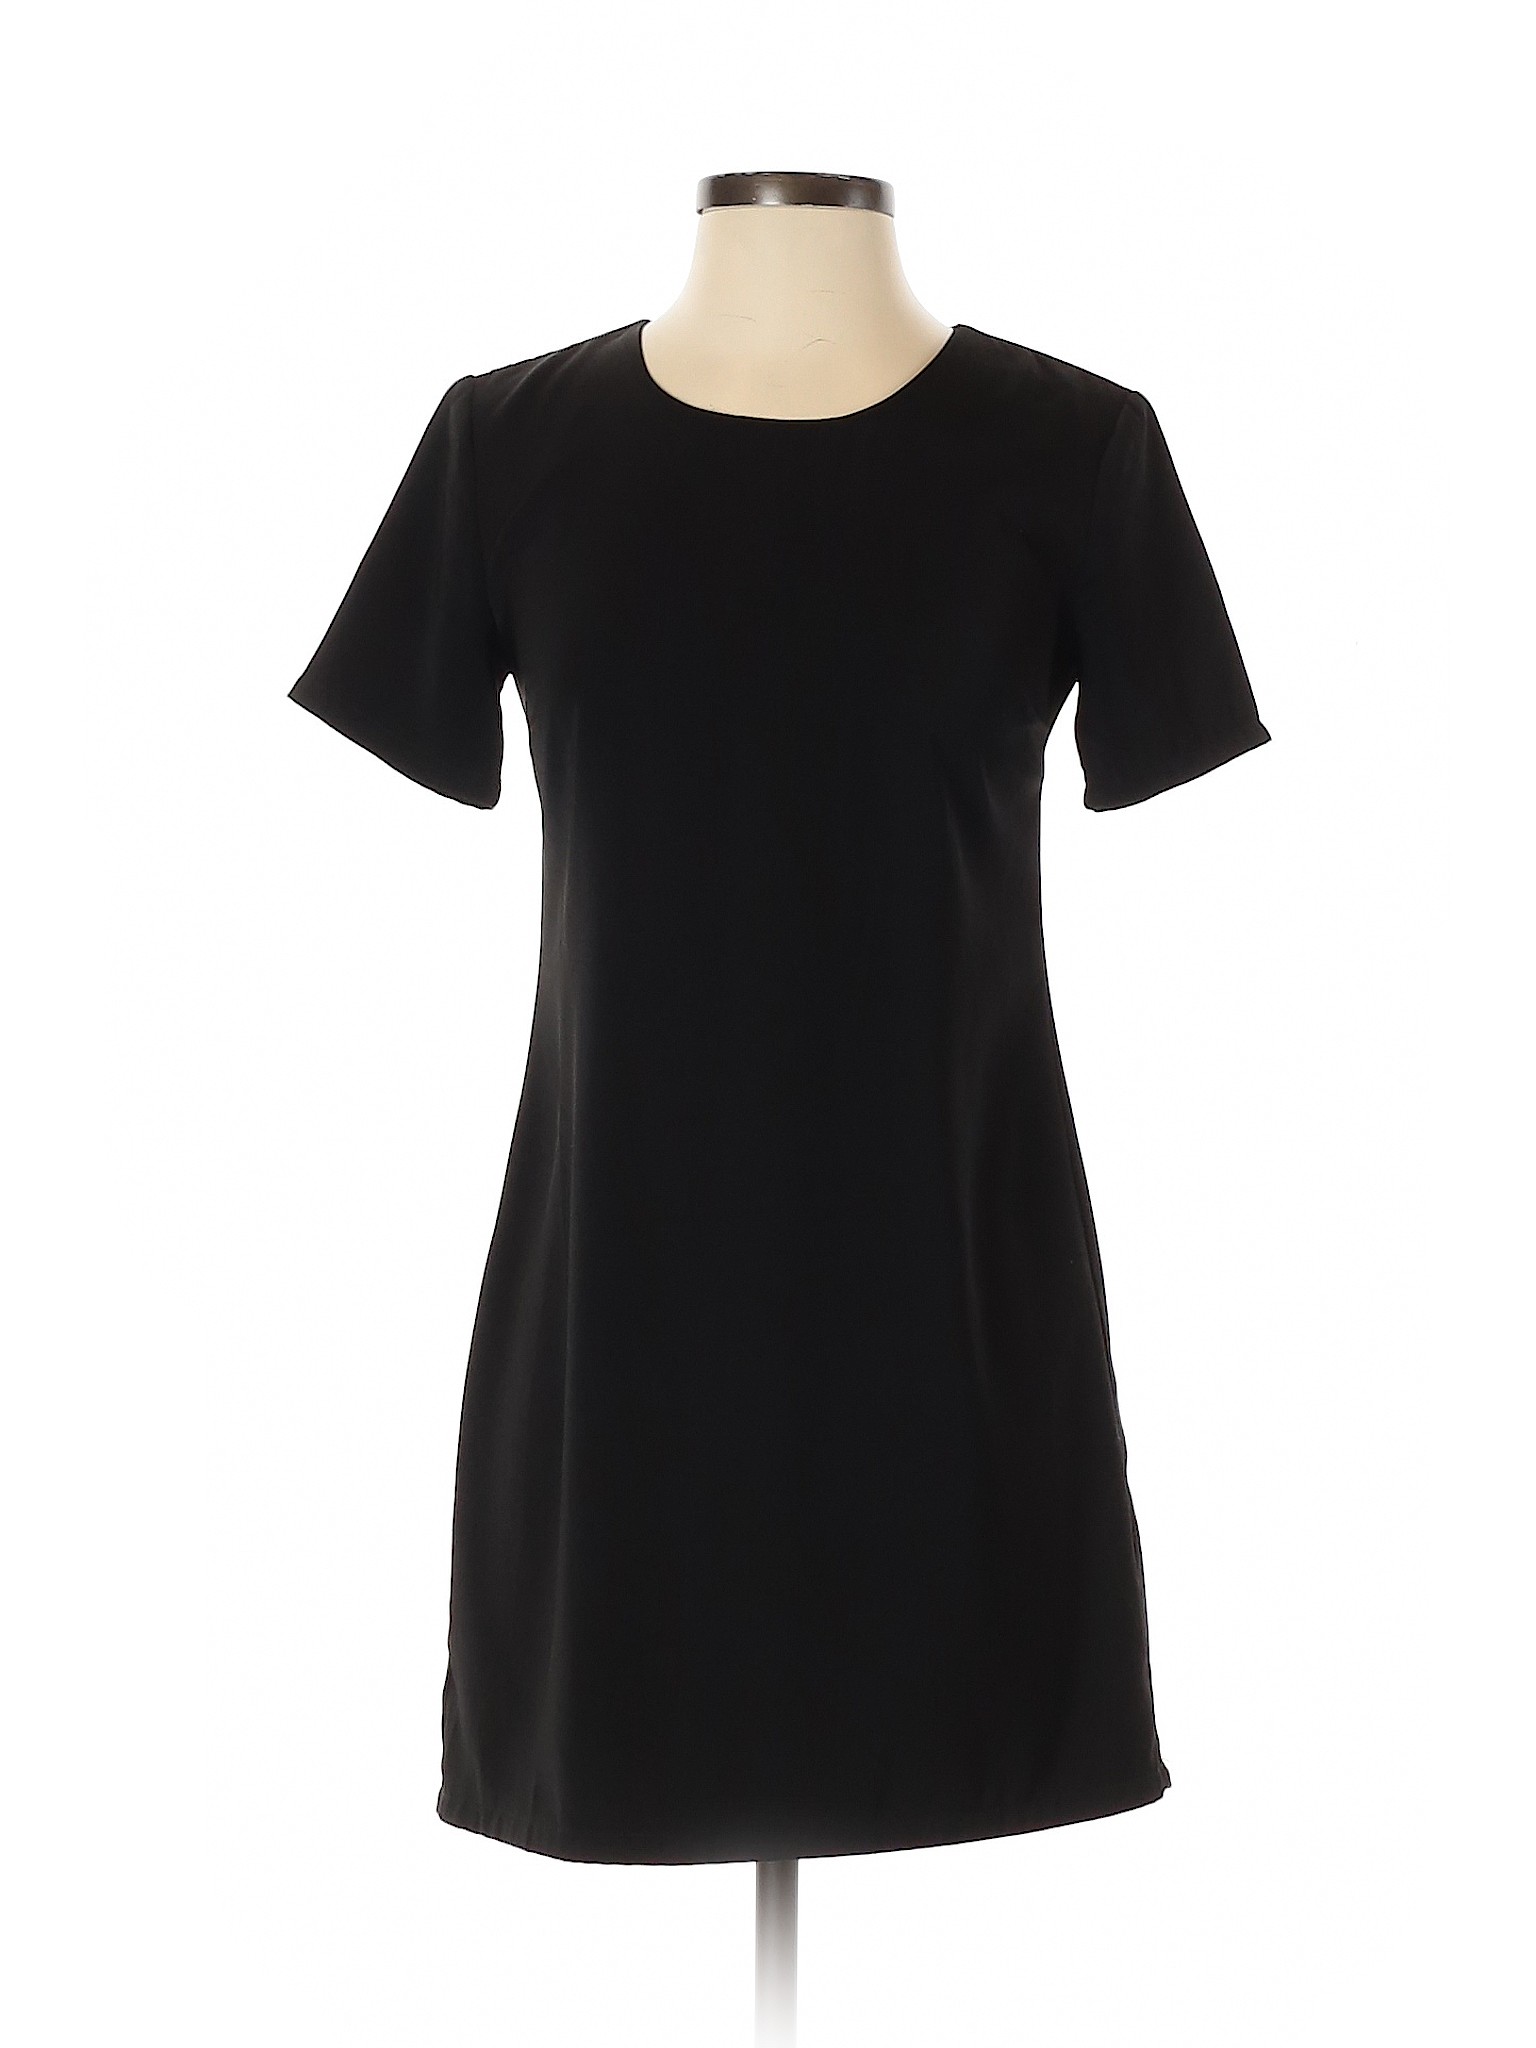 Kimchi Blue 100% Polyester Solid Black Casual Dress Size S - 82% off ...